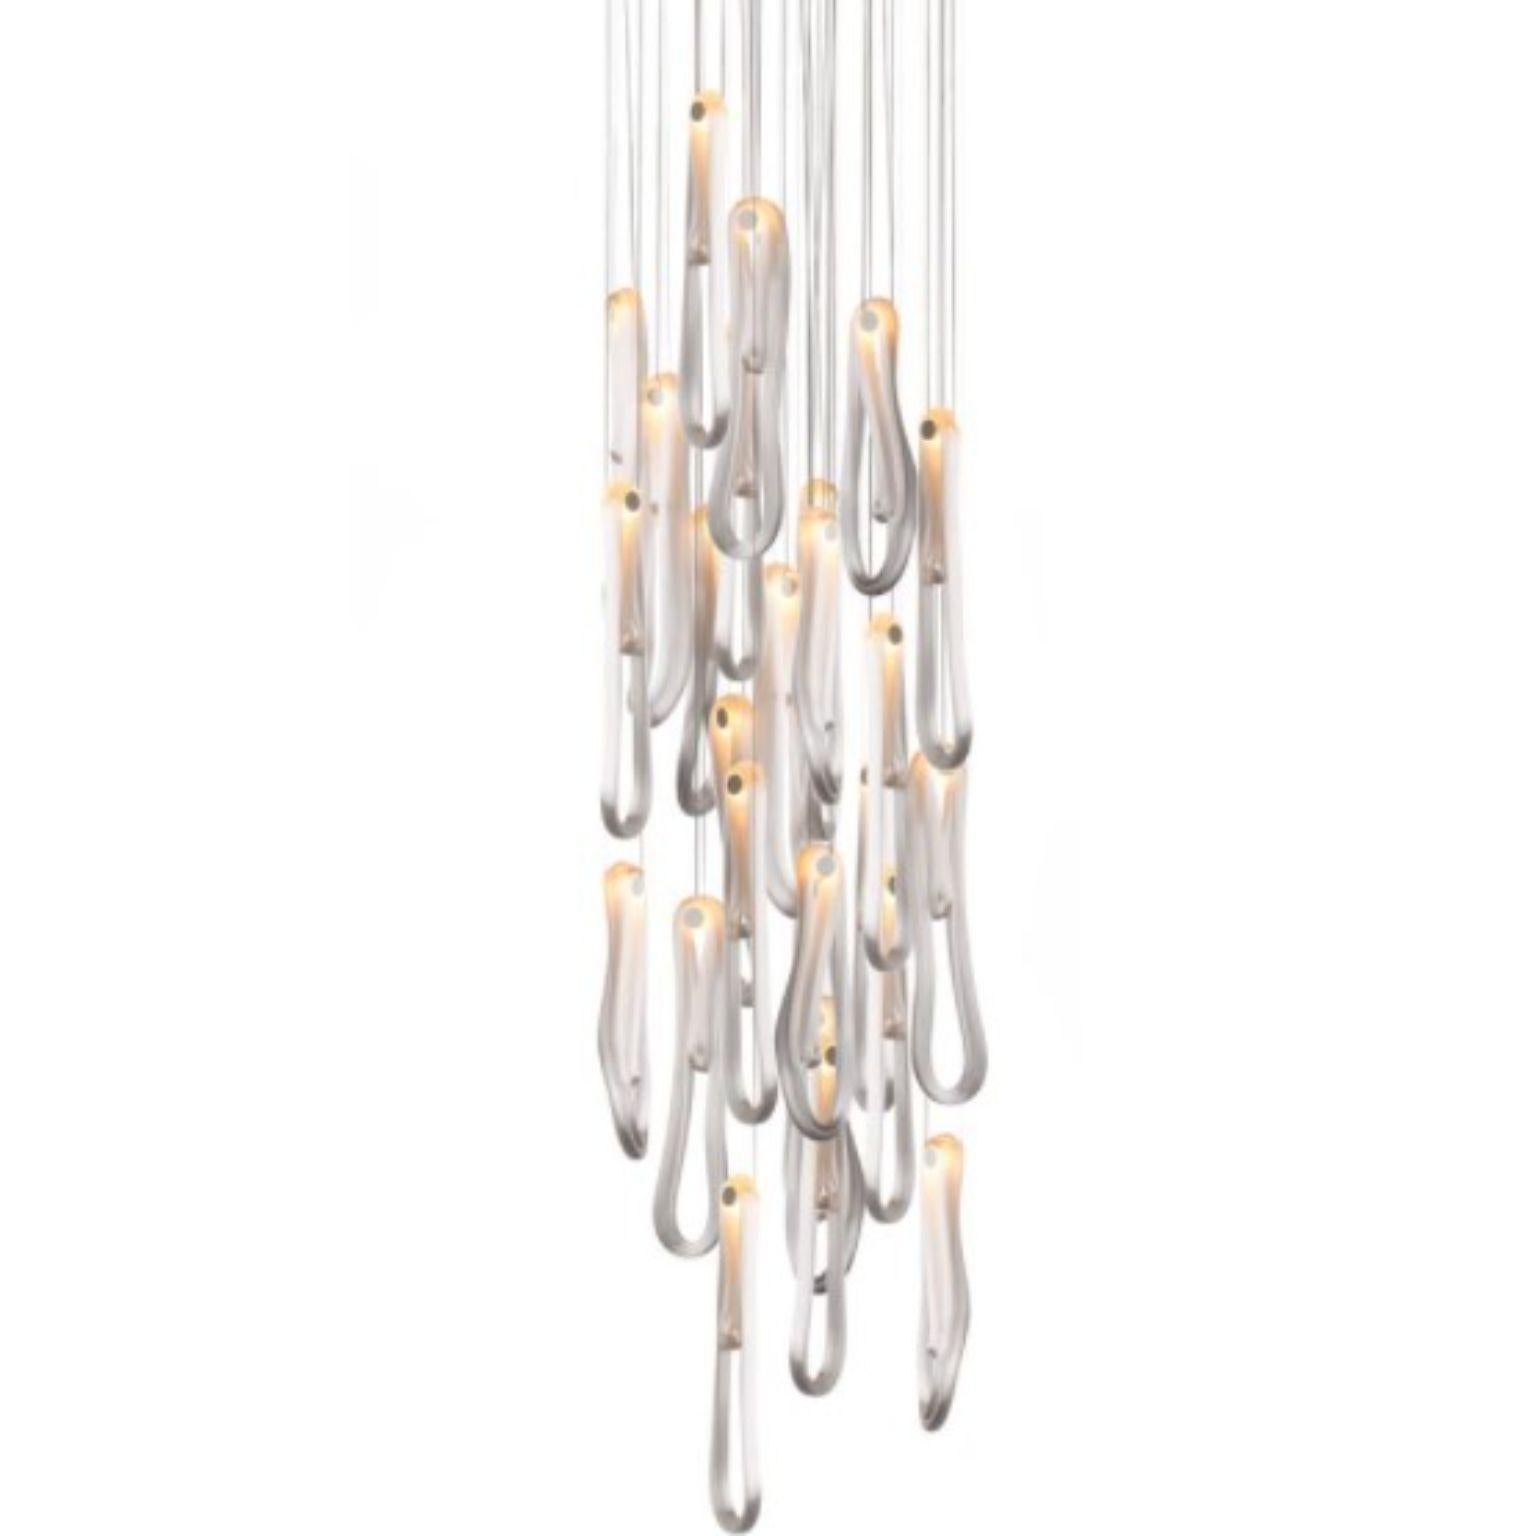 87.36 Pendant by Bocci
Dimensions: D75.5 x W75.5 x H300 cm
Materials: white powder coated rectangular canopy
Weight: 68.6 kg
Also Available in different dimensions.
All our lamps can be wired according to each country. If sold to the USA it